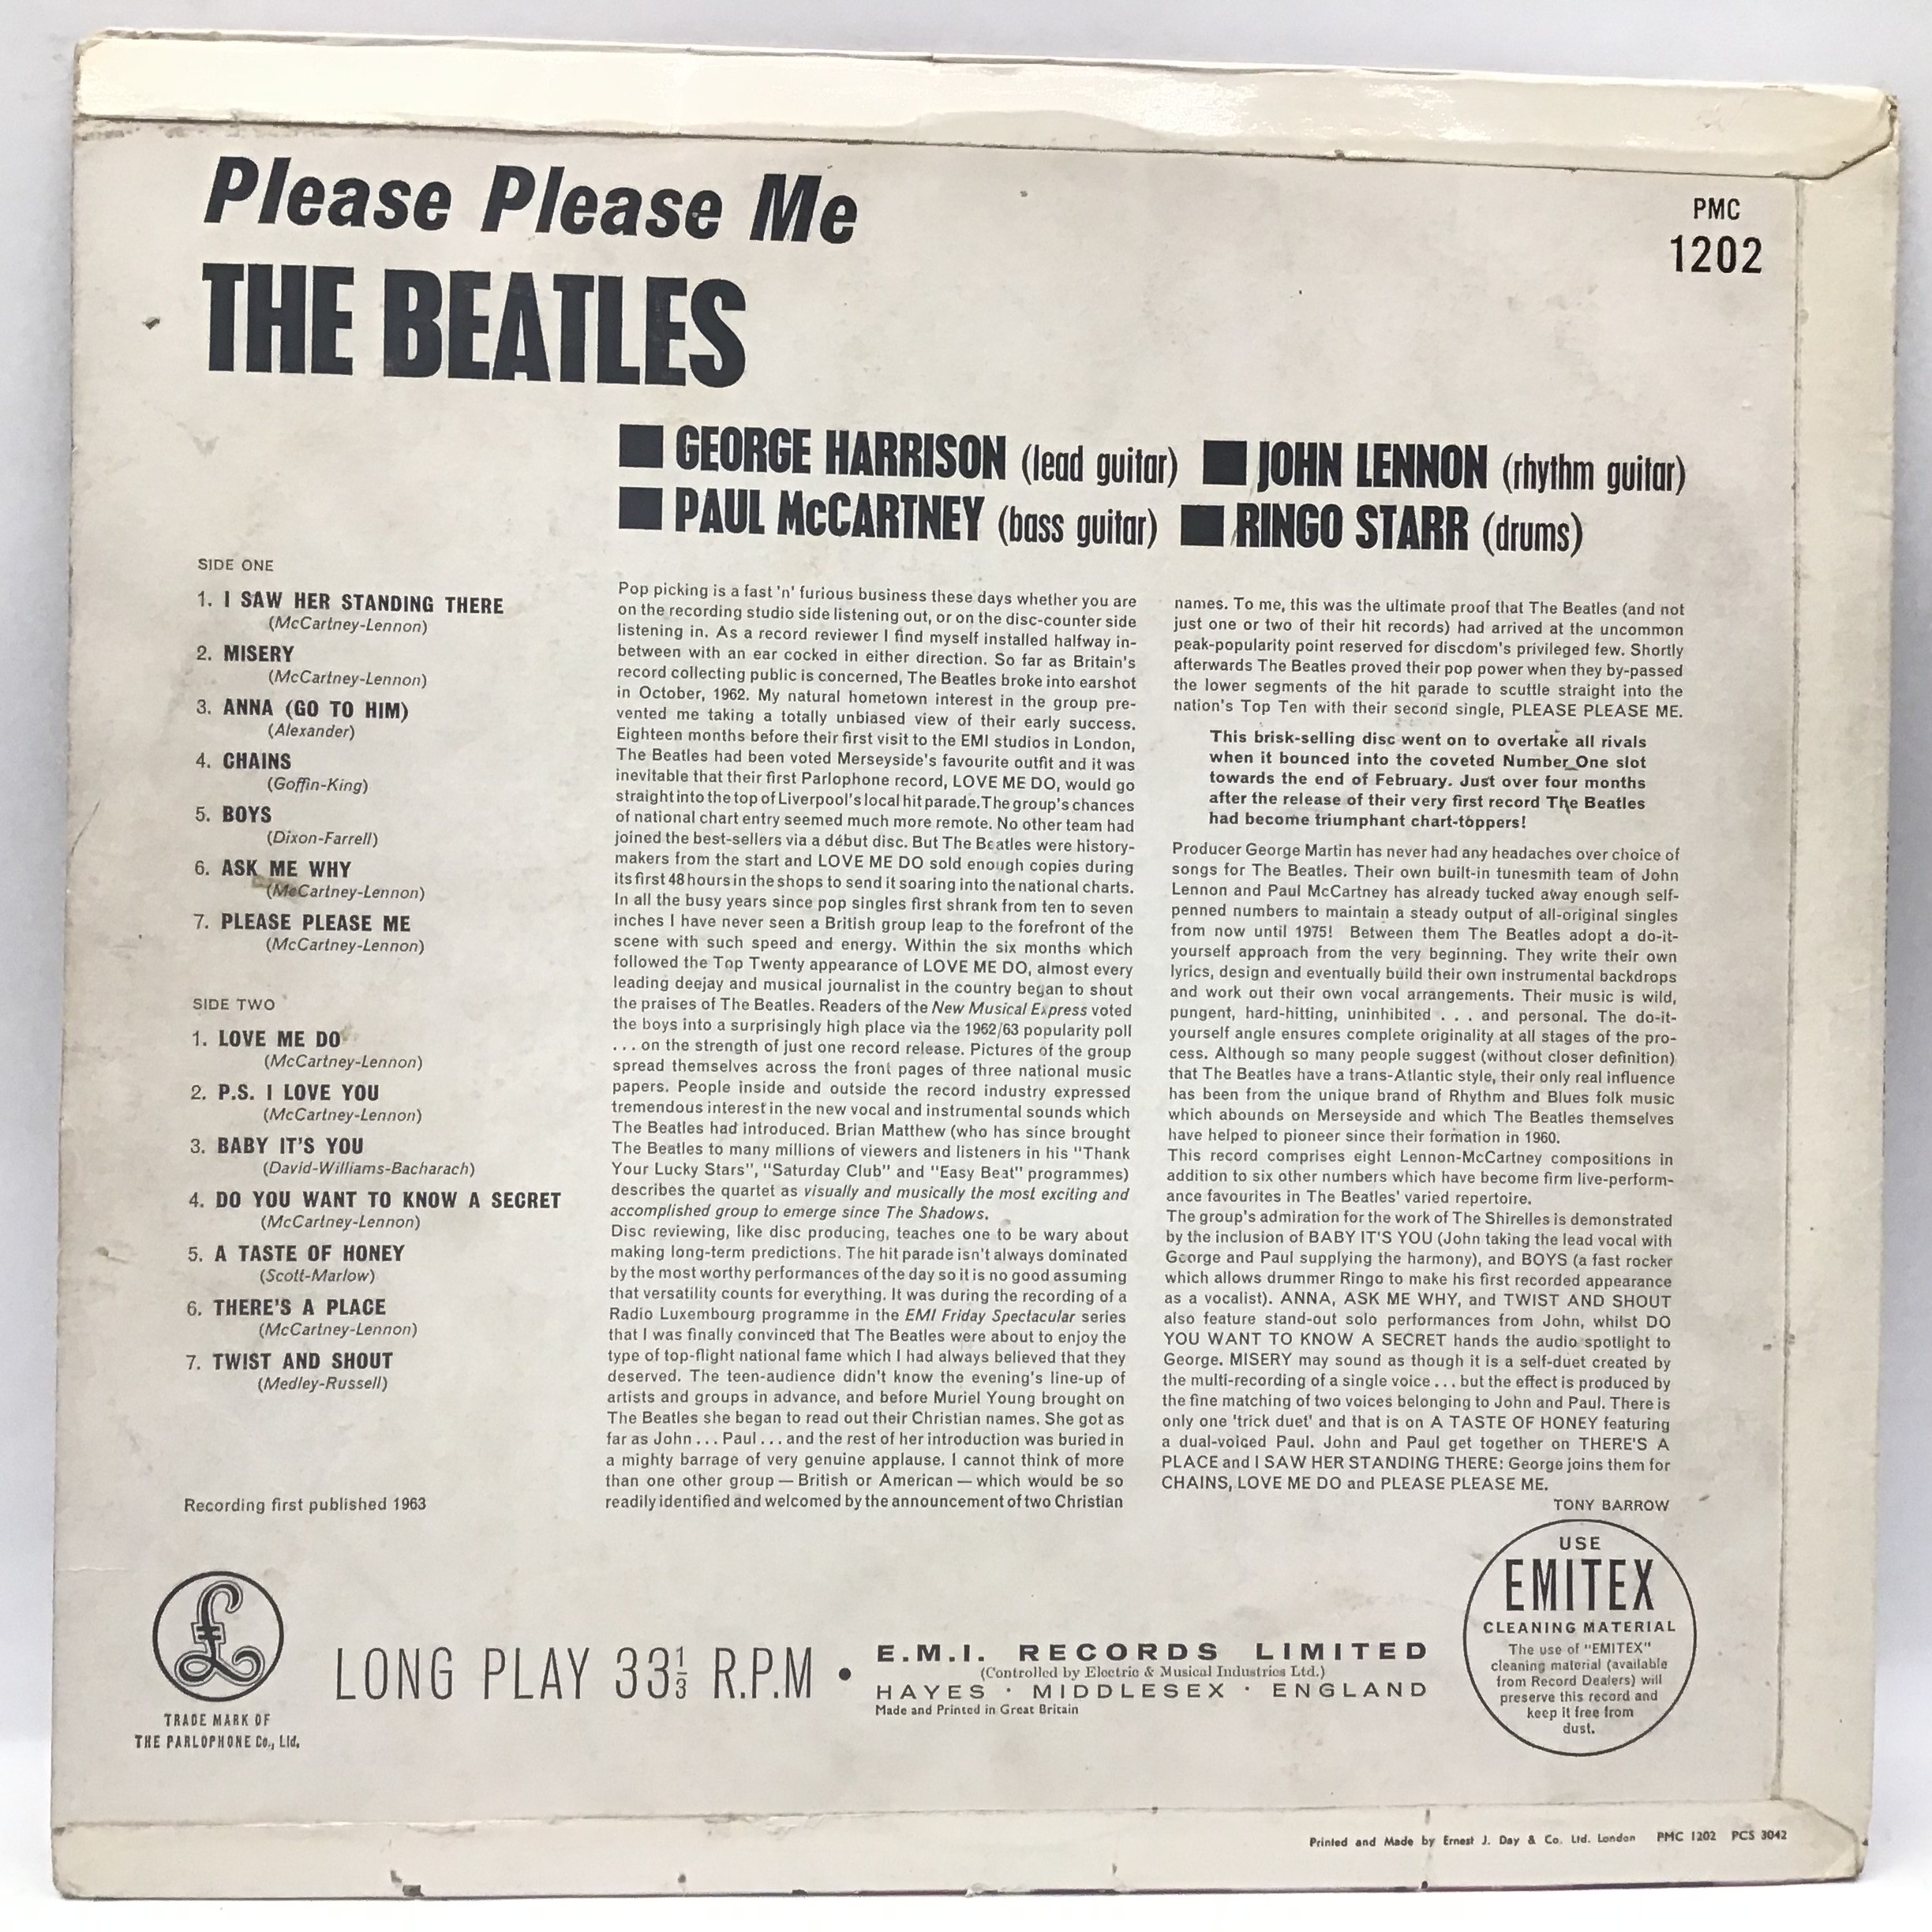 BEATLES - BLACK AND GOLD ?Please Please Me? LP vinyl record. Found on the Parlophone label PMC - Image 9 of 13